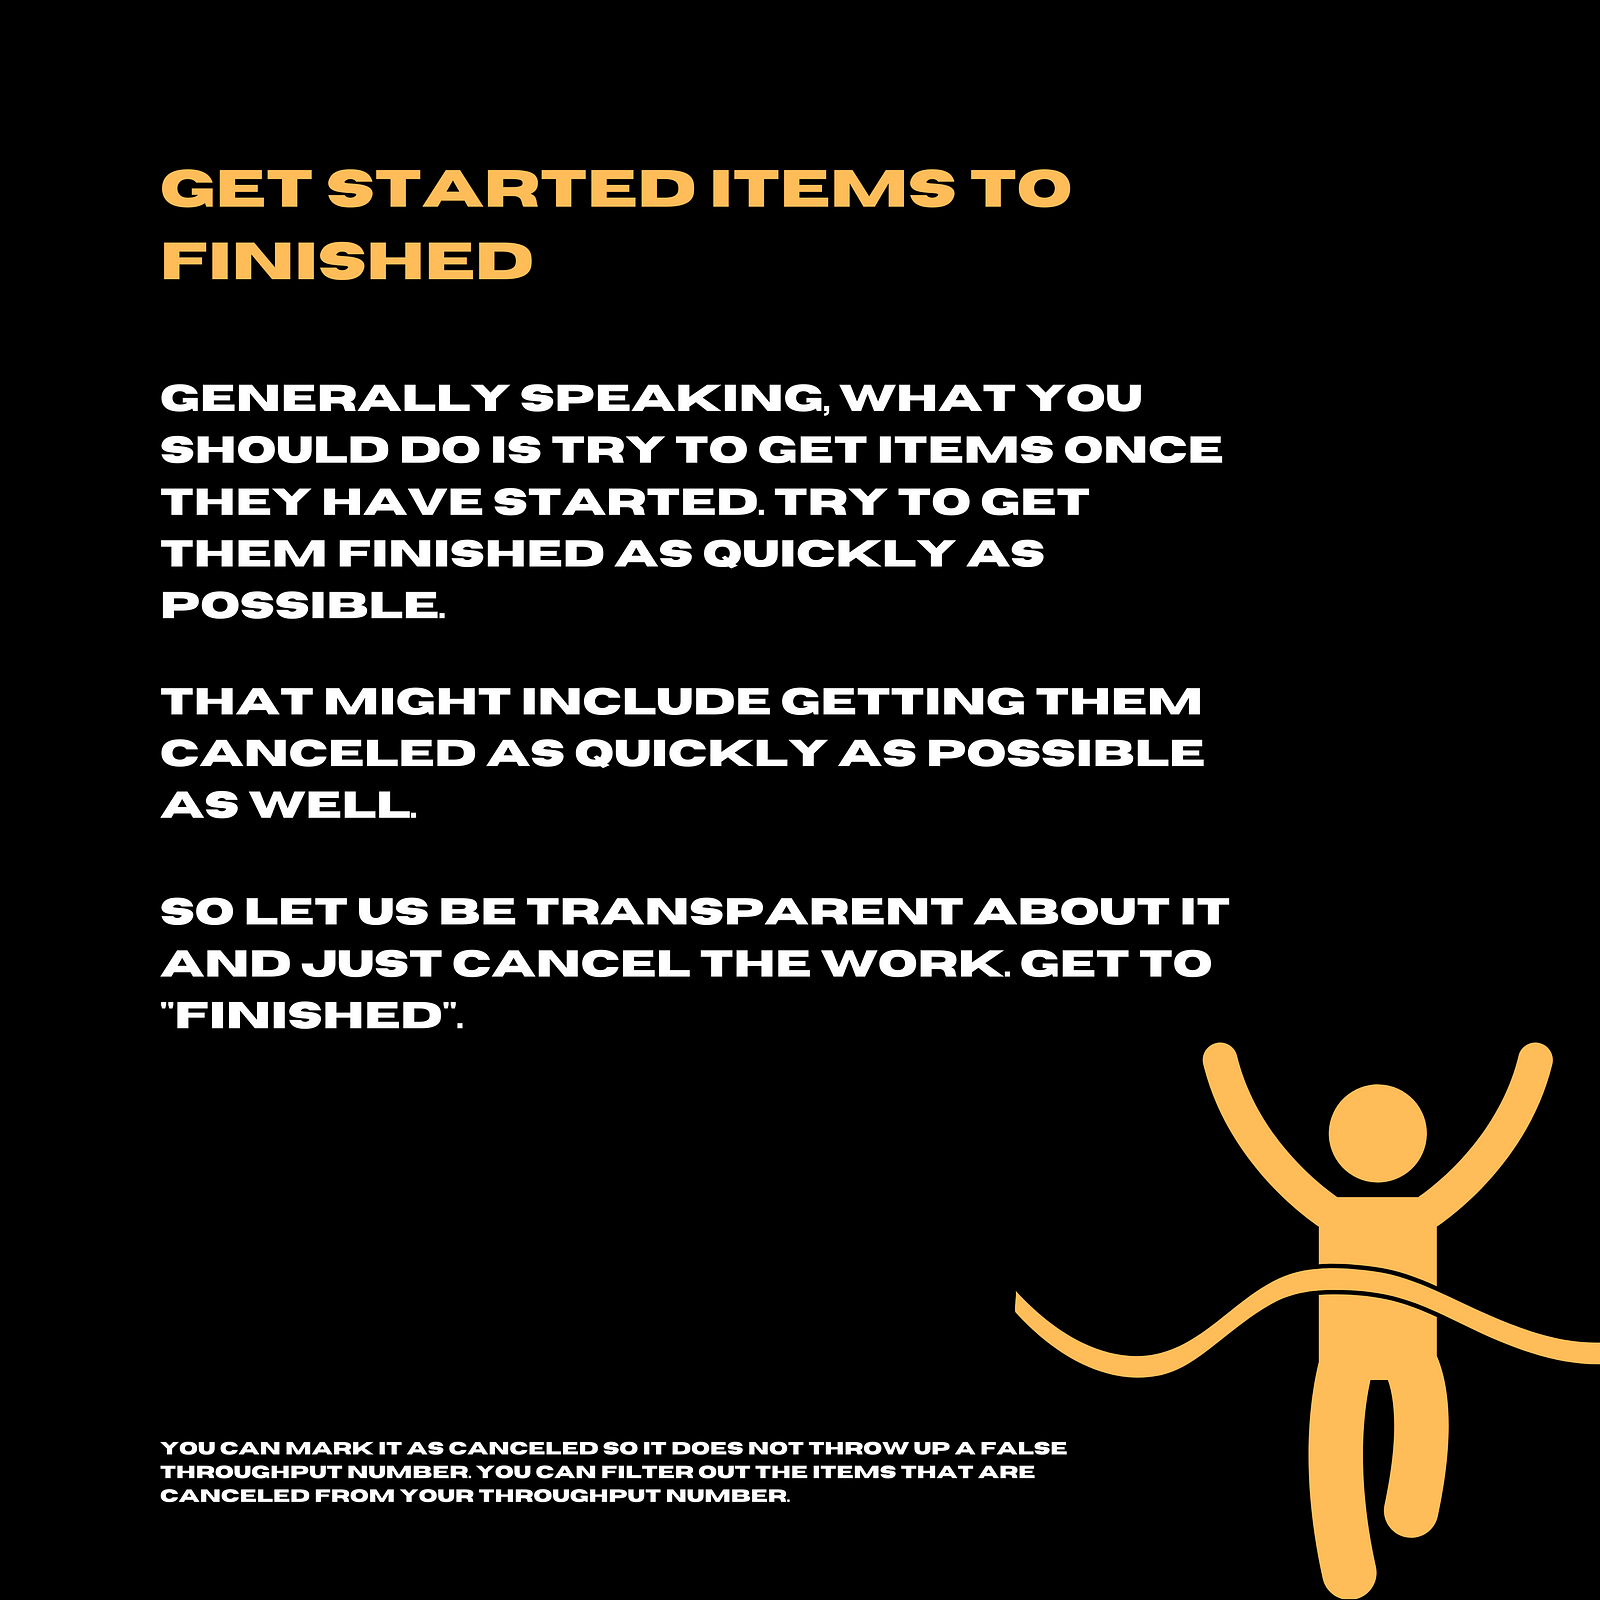 get started items finished